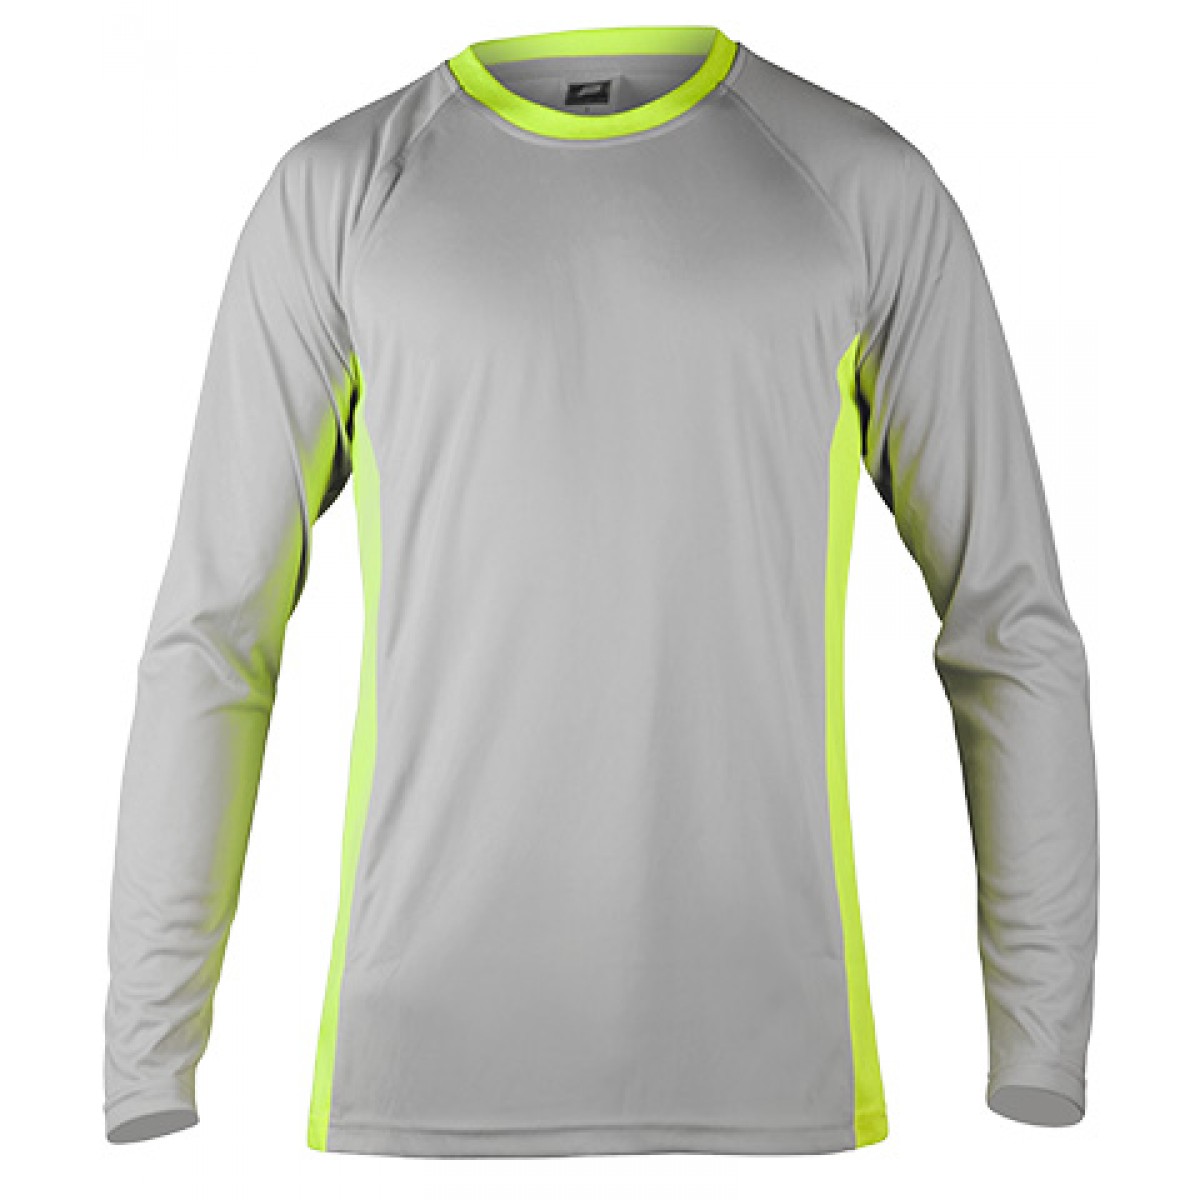 Long Sleeve Performance With Side Insert